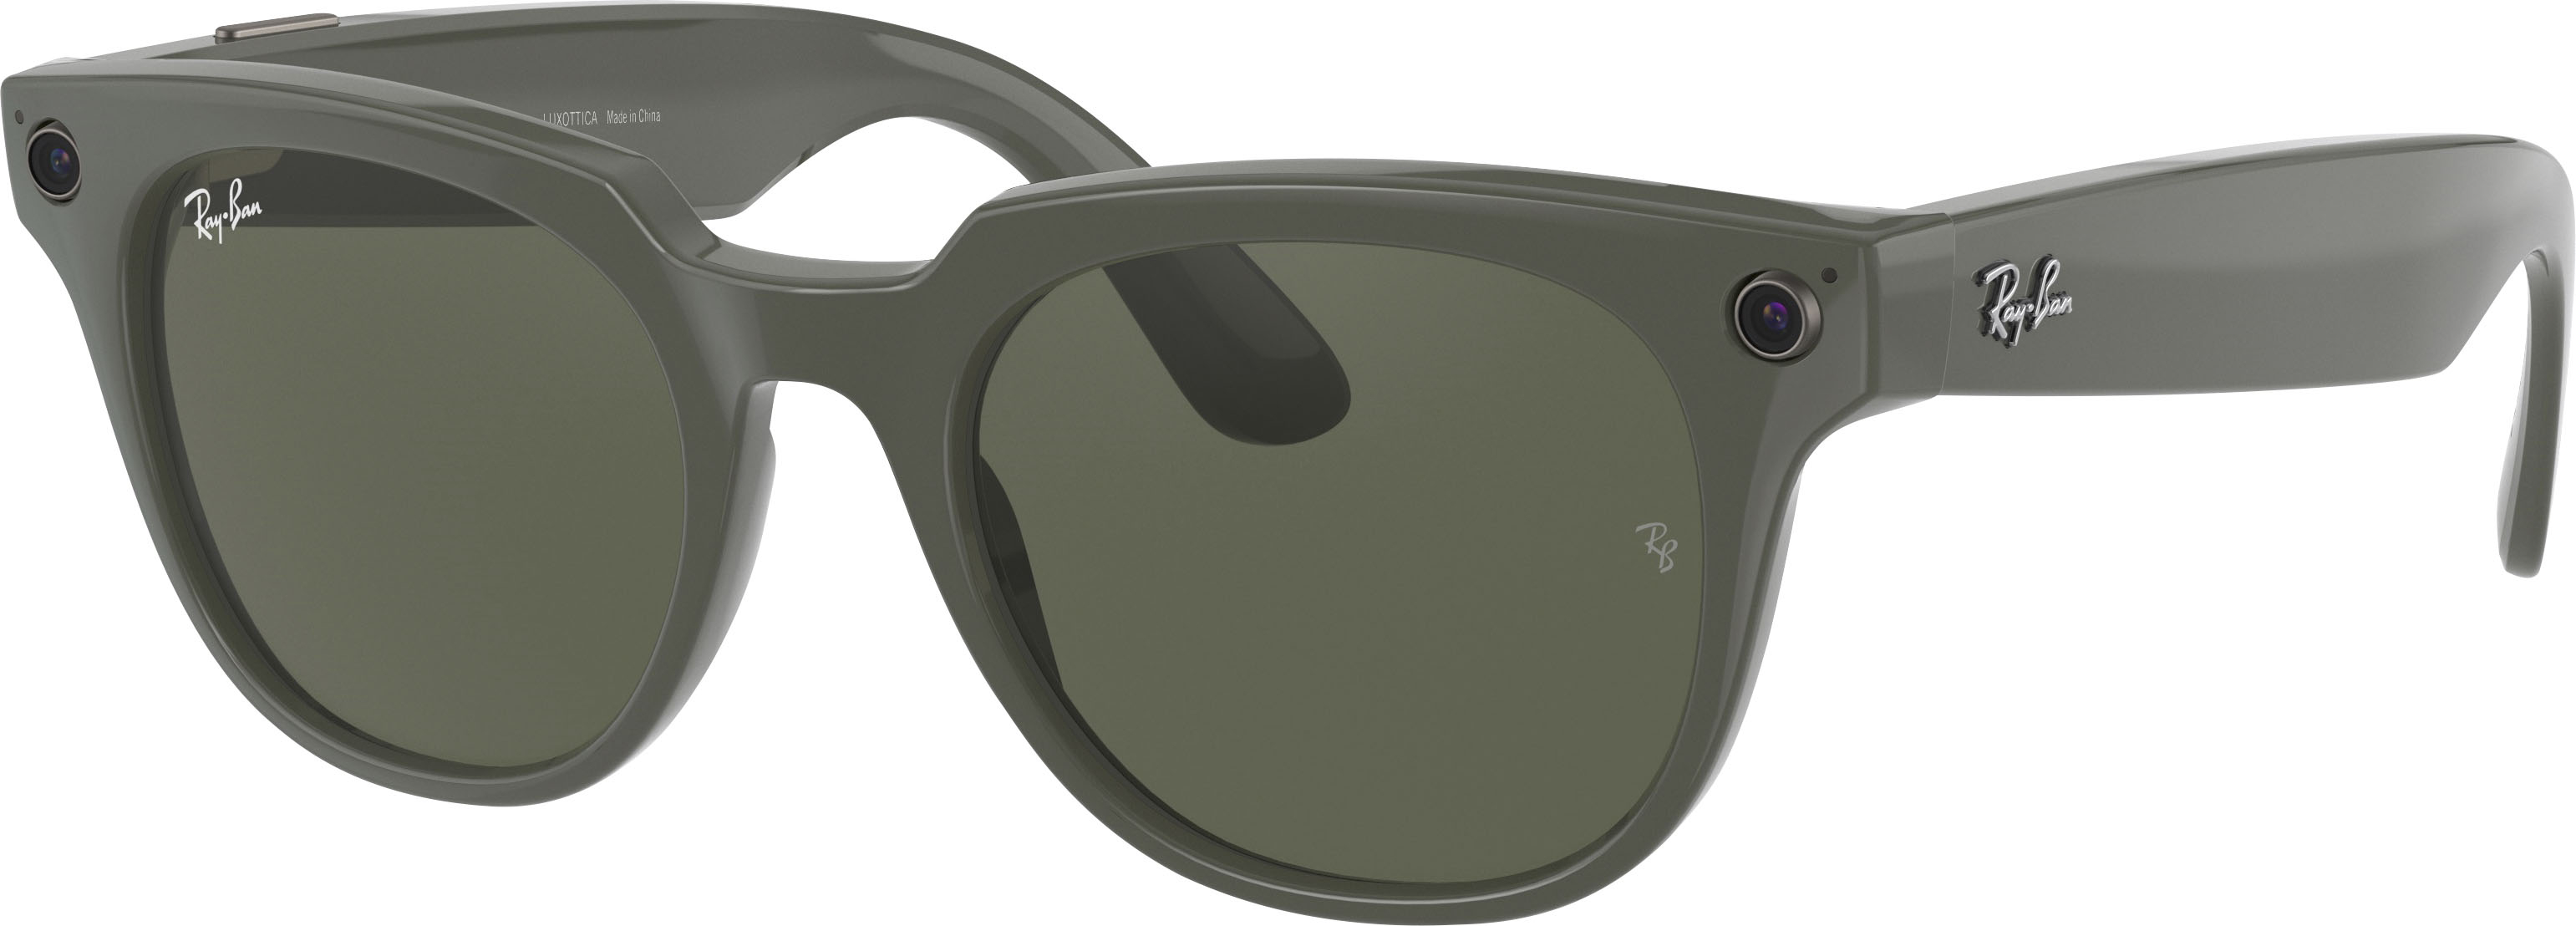 Customer Reviews: Ray-Ban Stories Meteor Smart Glasses Shiny Olive/Transitions  G-15 Green 0RW40056563M351 - Best Buy